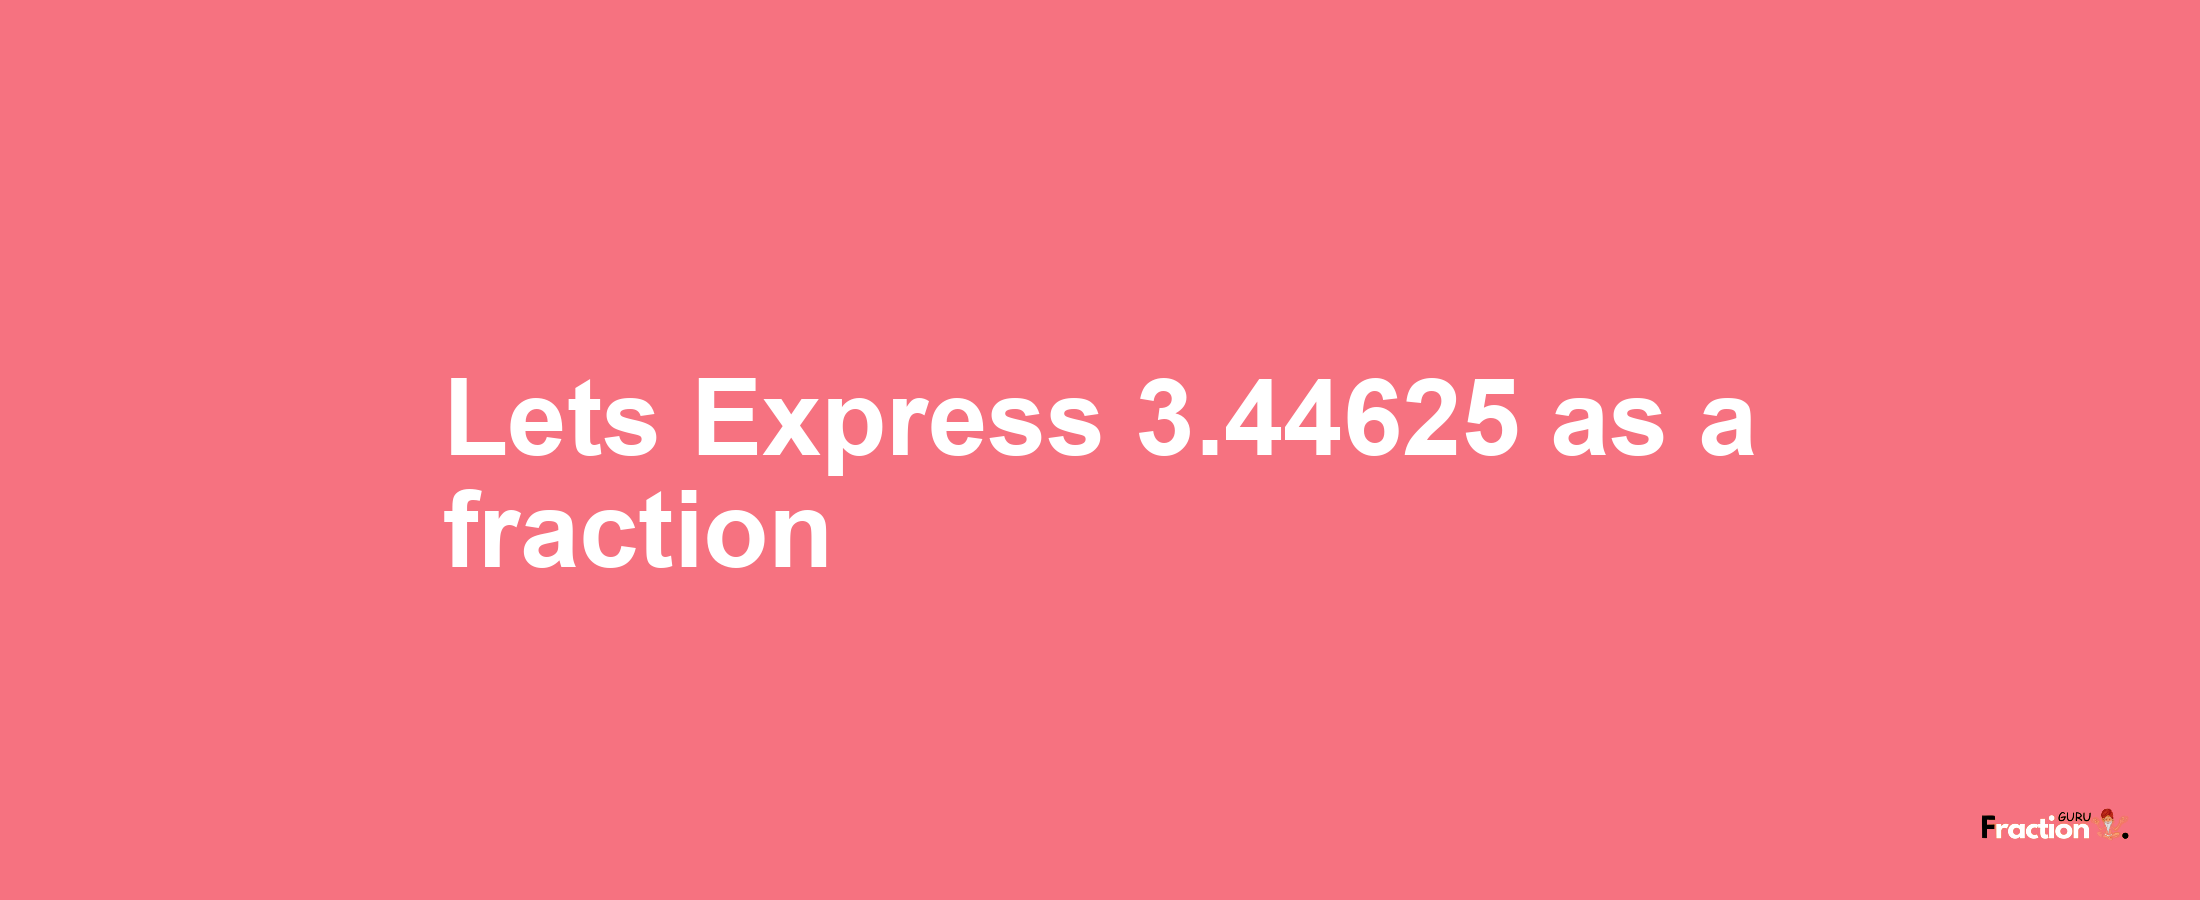 Lets Express 3.44625 as afraction